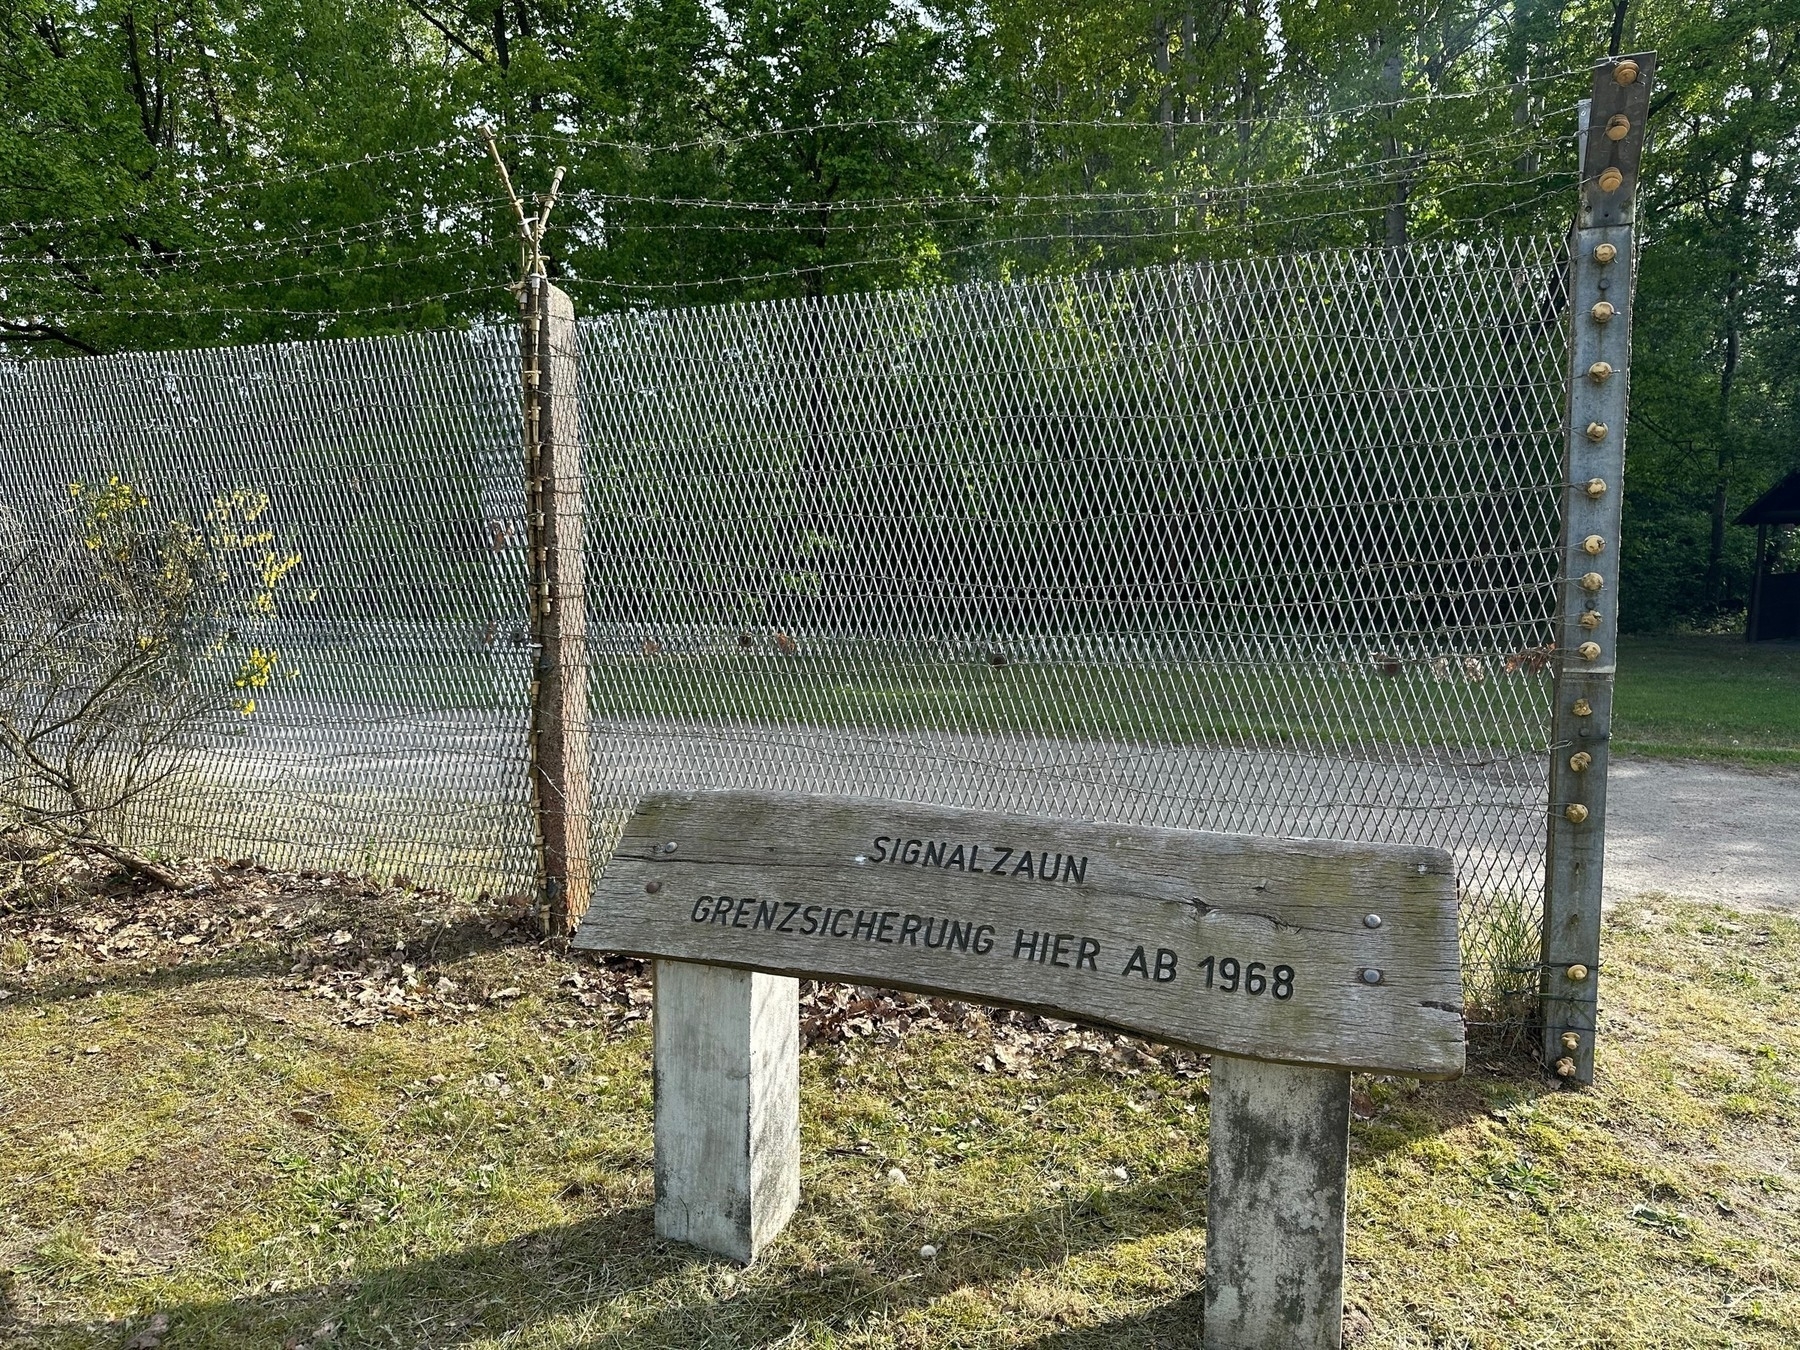 Part of an old border fence on the border to the former GDR.